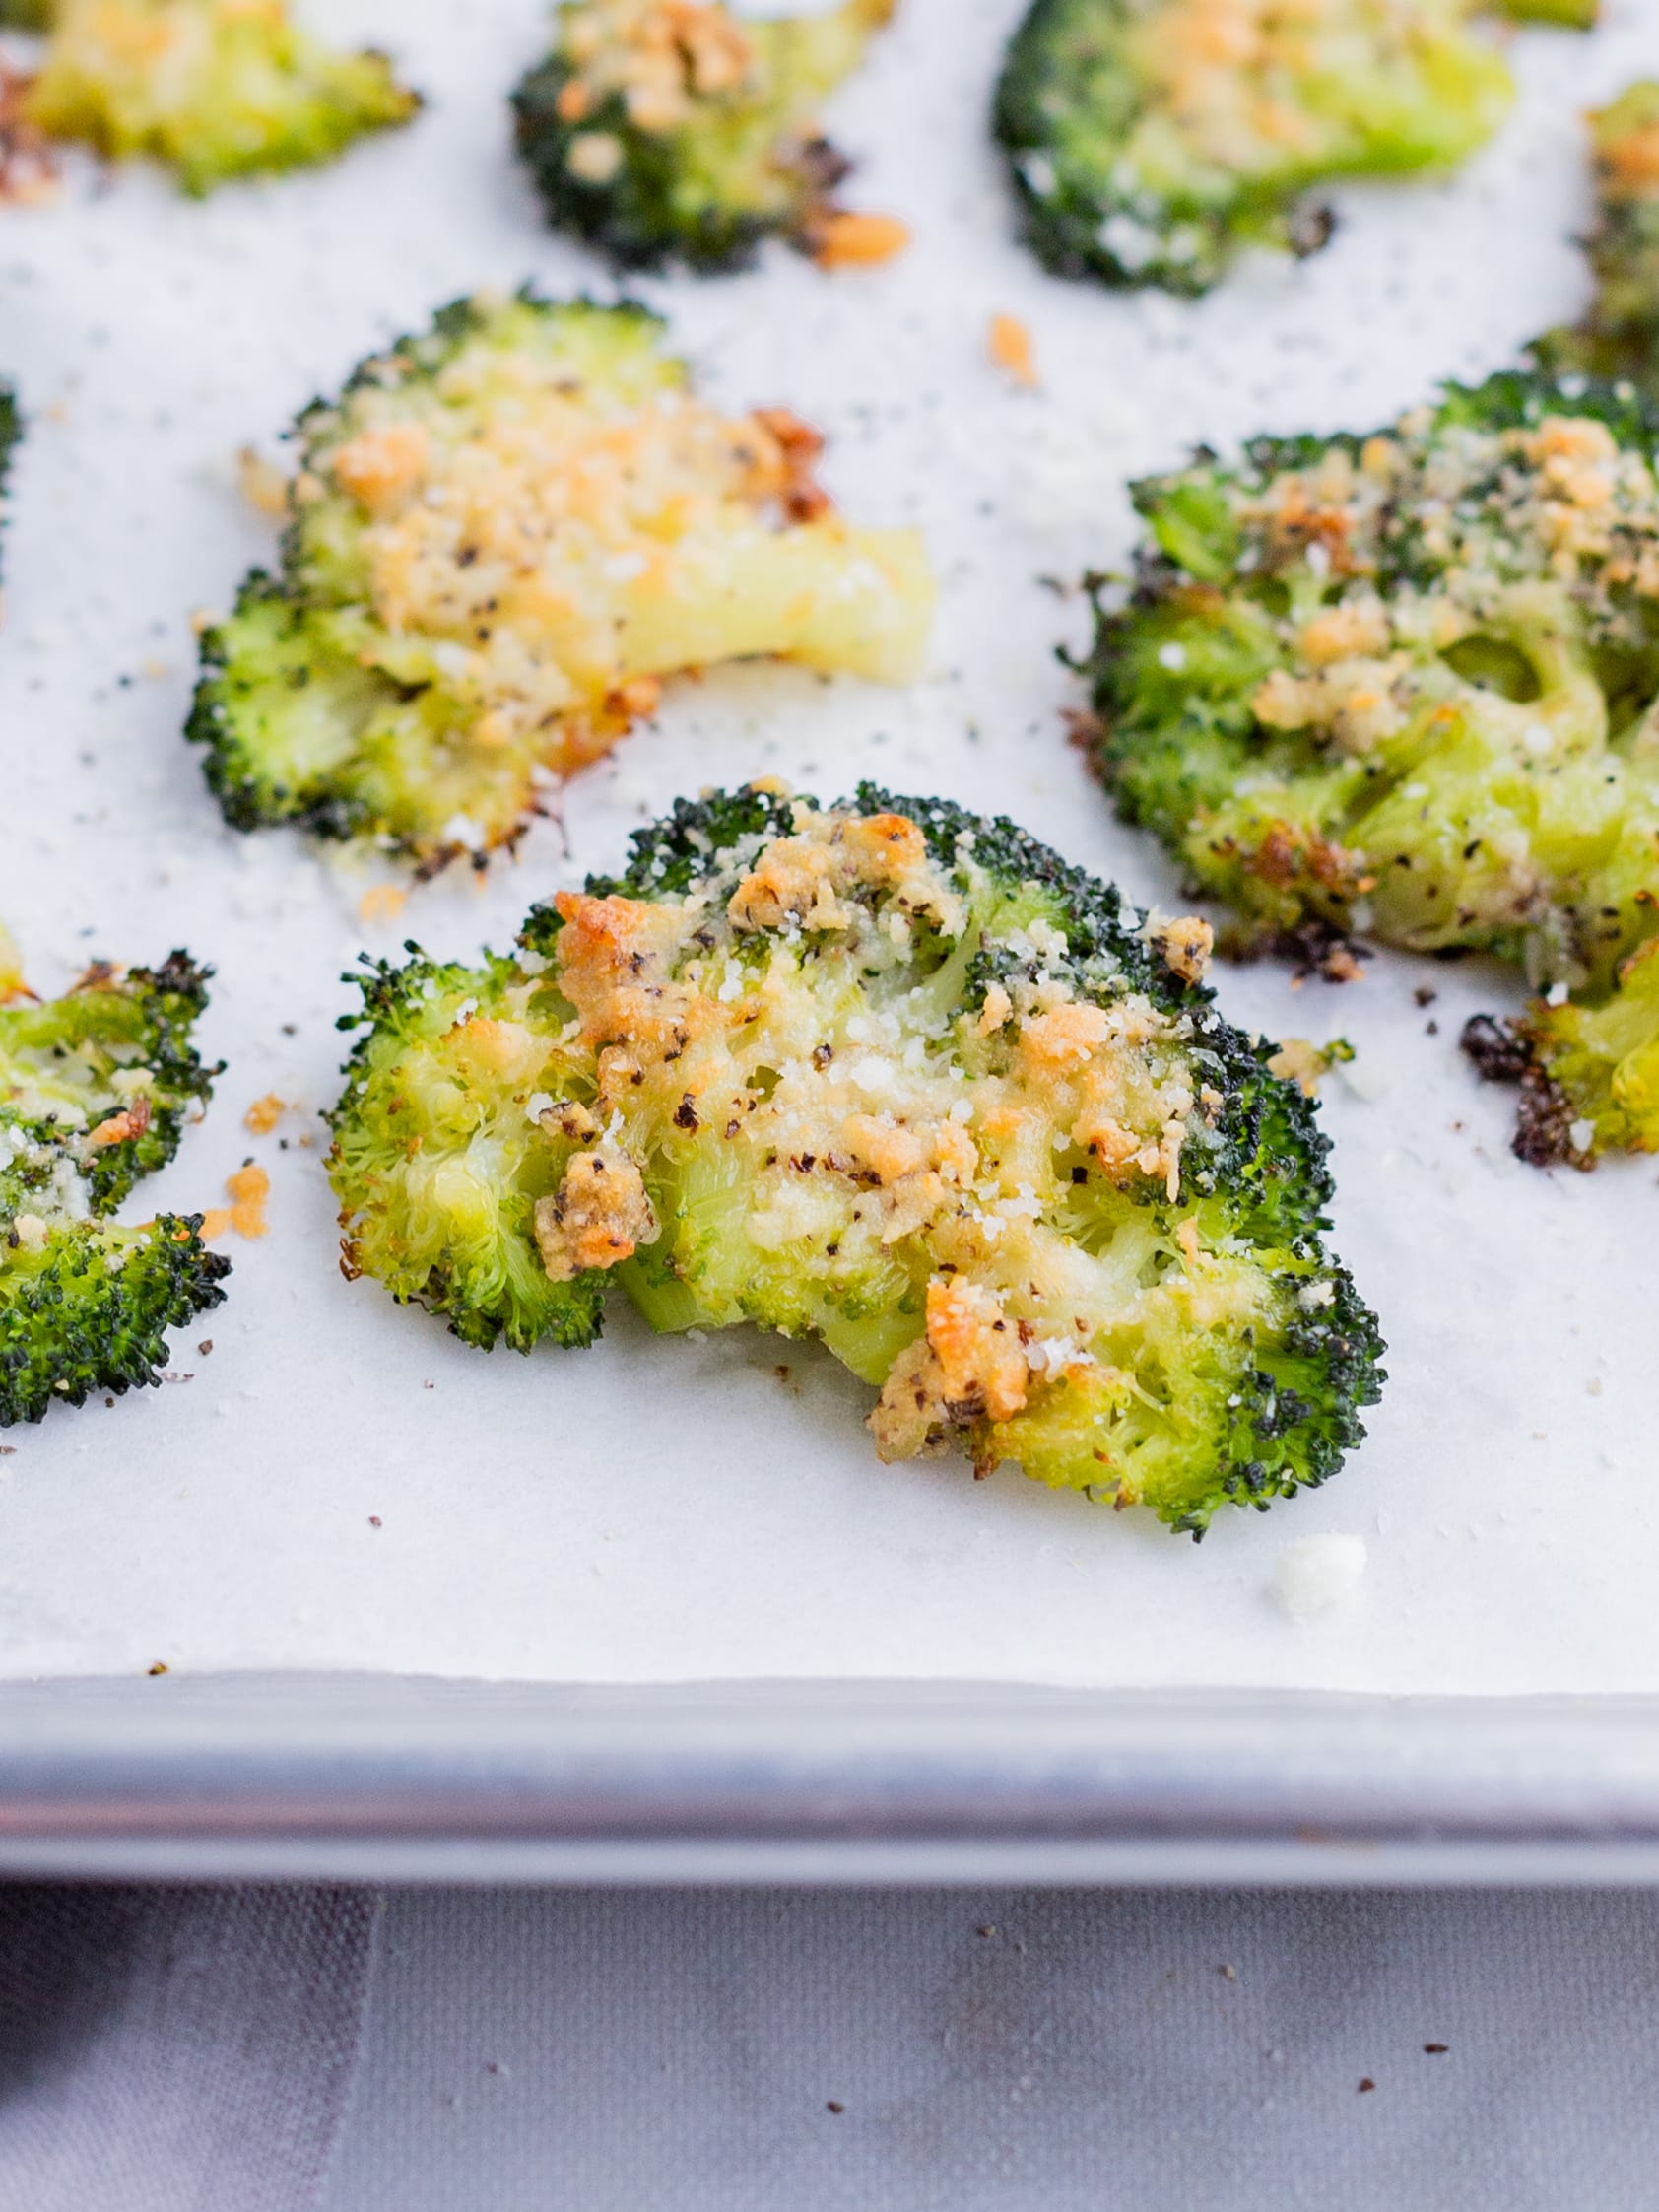 Smashed broccoli is baked in the oven until crispy.